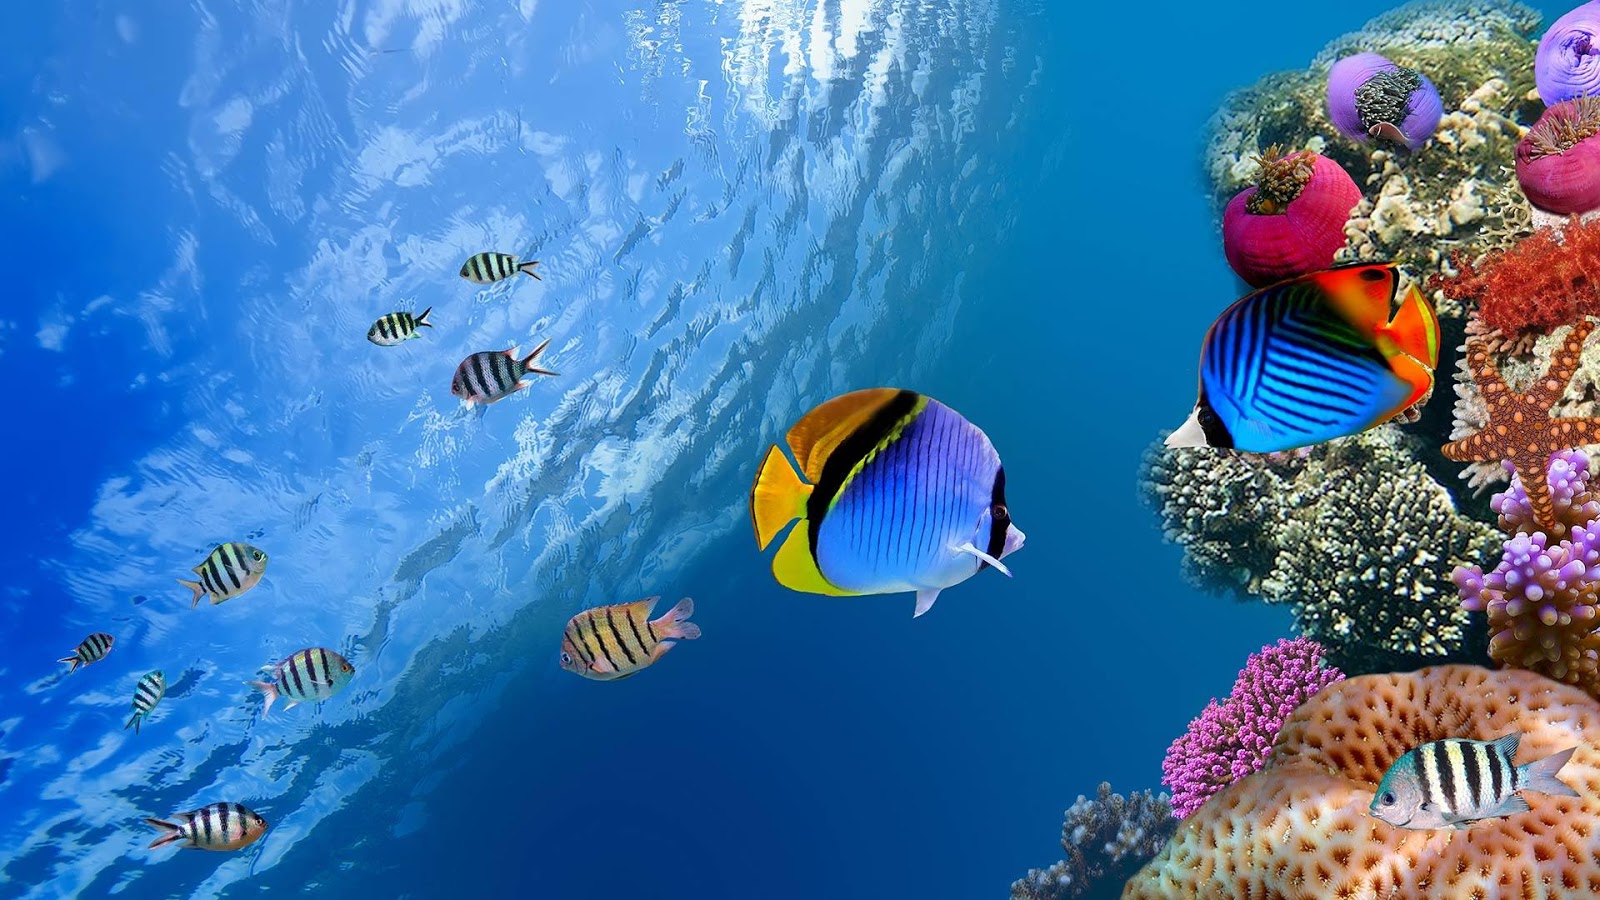 Ocean Fish Live Wallpaper   Android Apps on Google Play